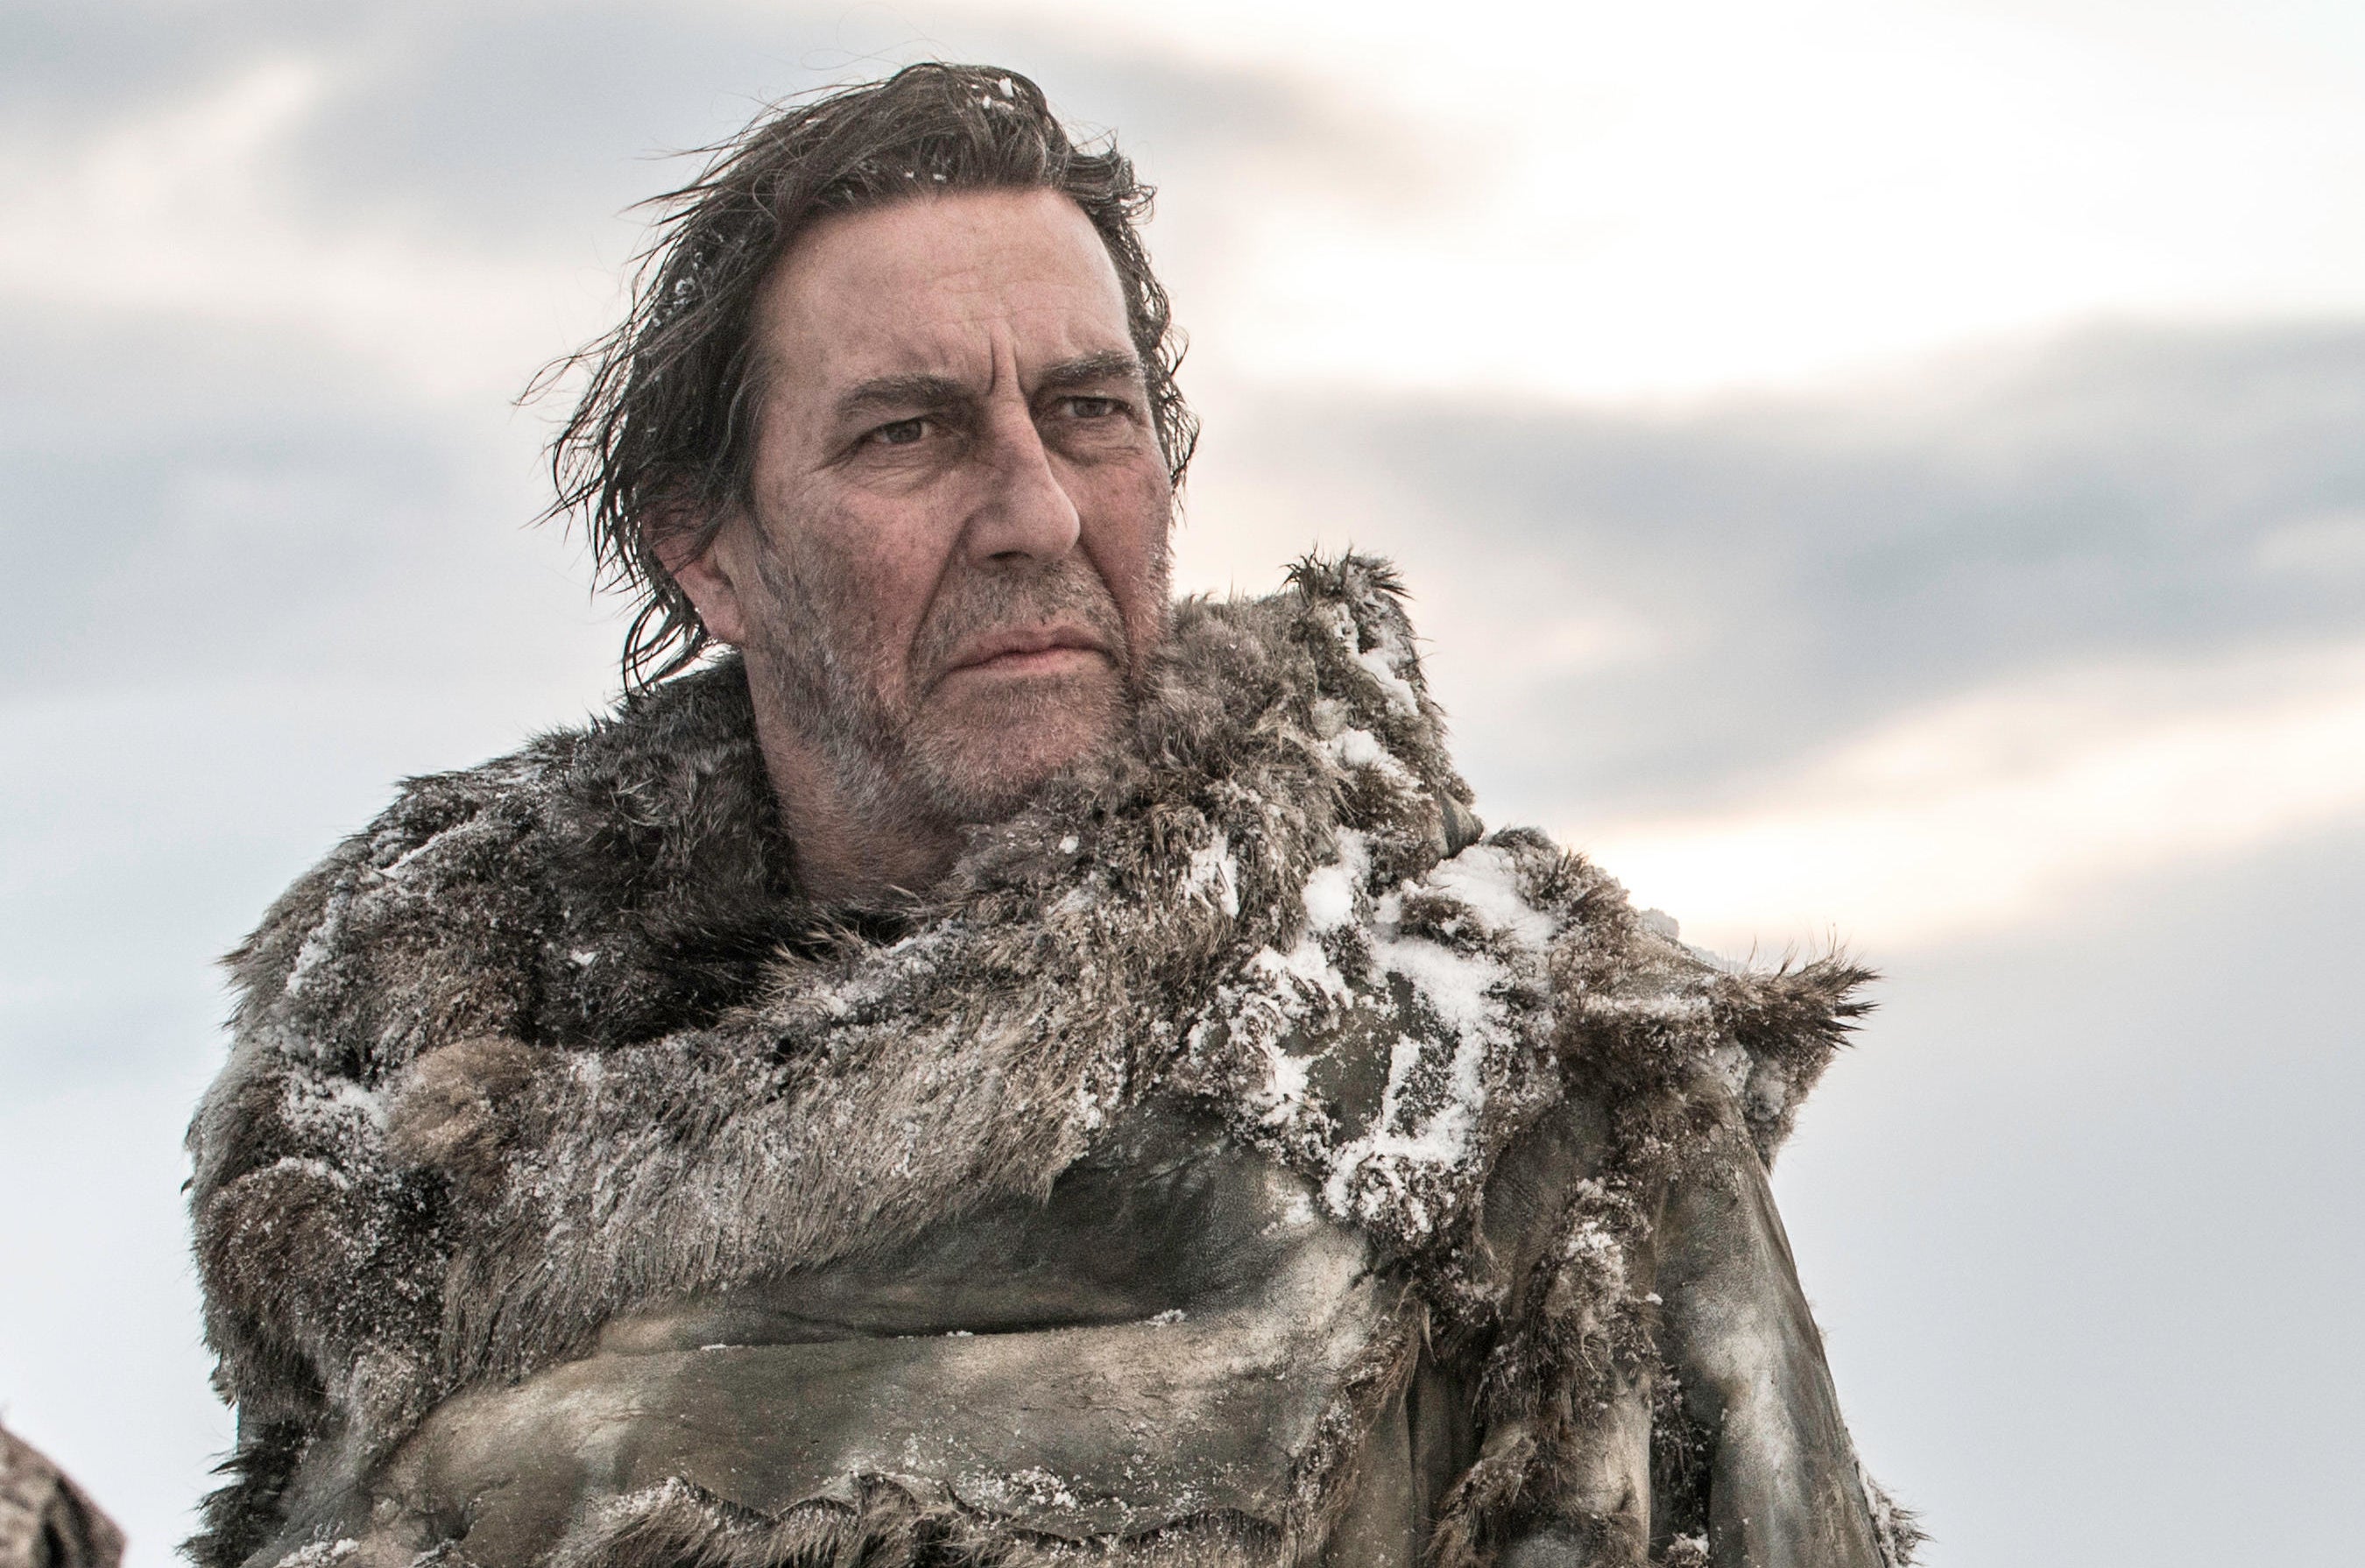 A man wearing a coat assembled from fur pelts observes a situation in a frozen tundra.